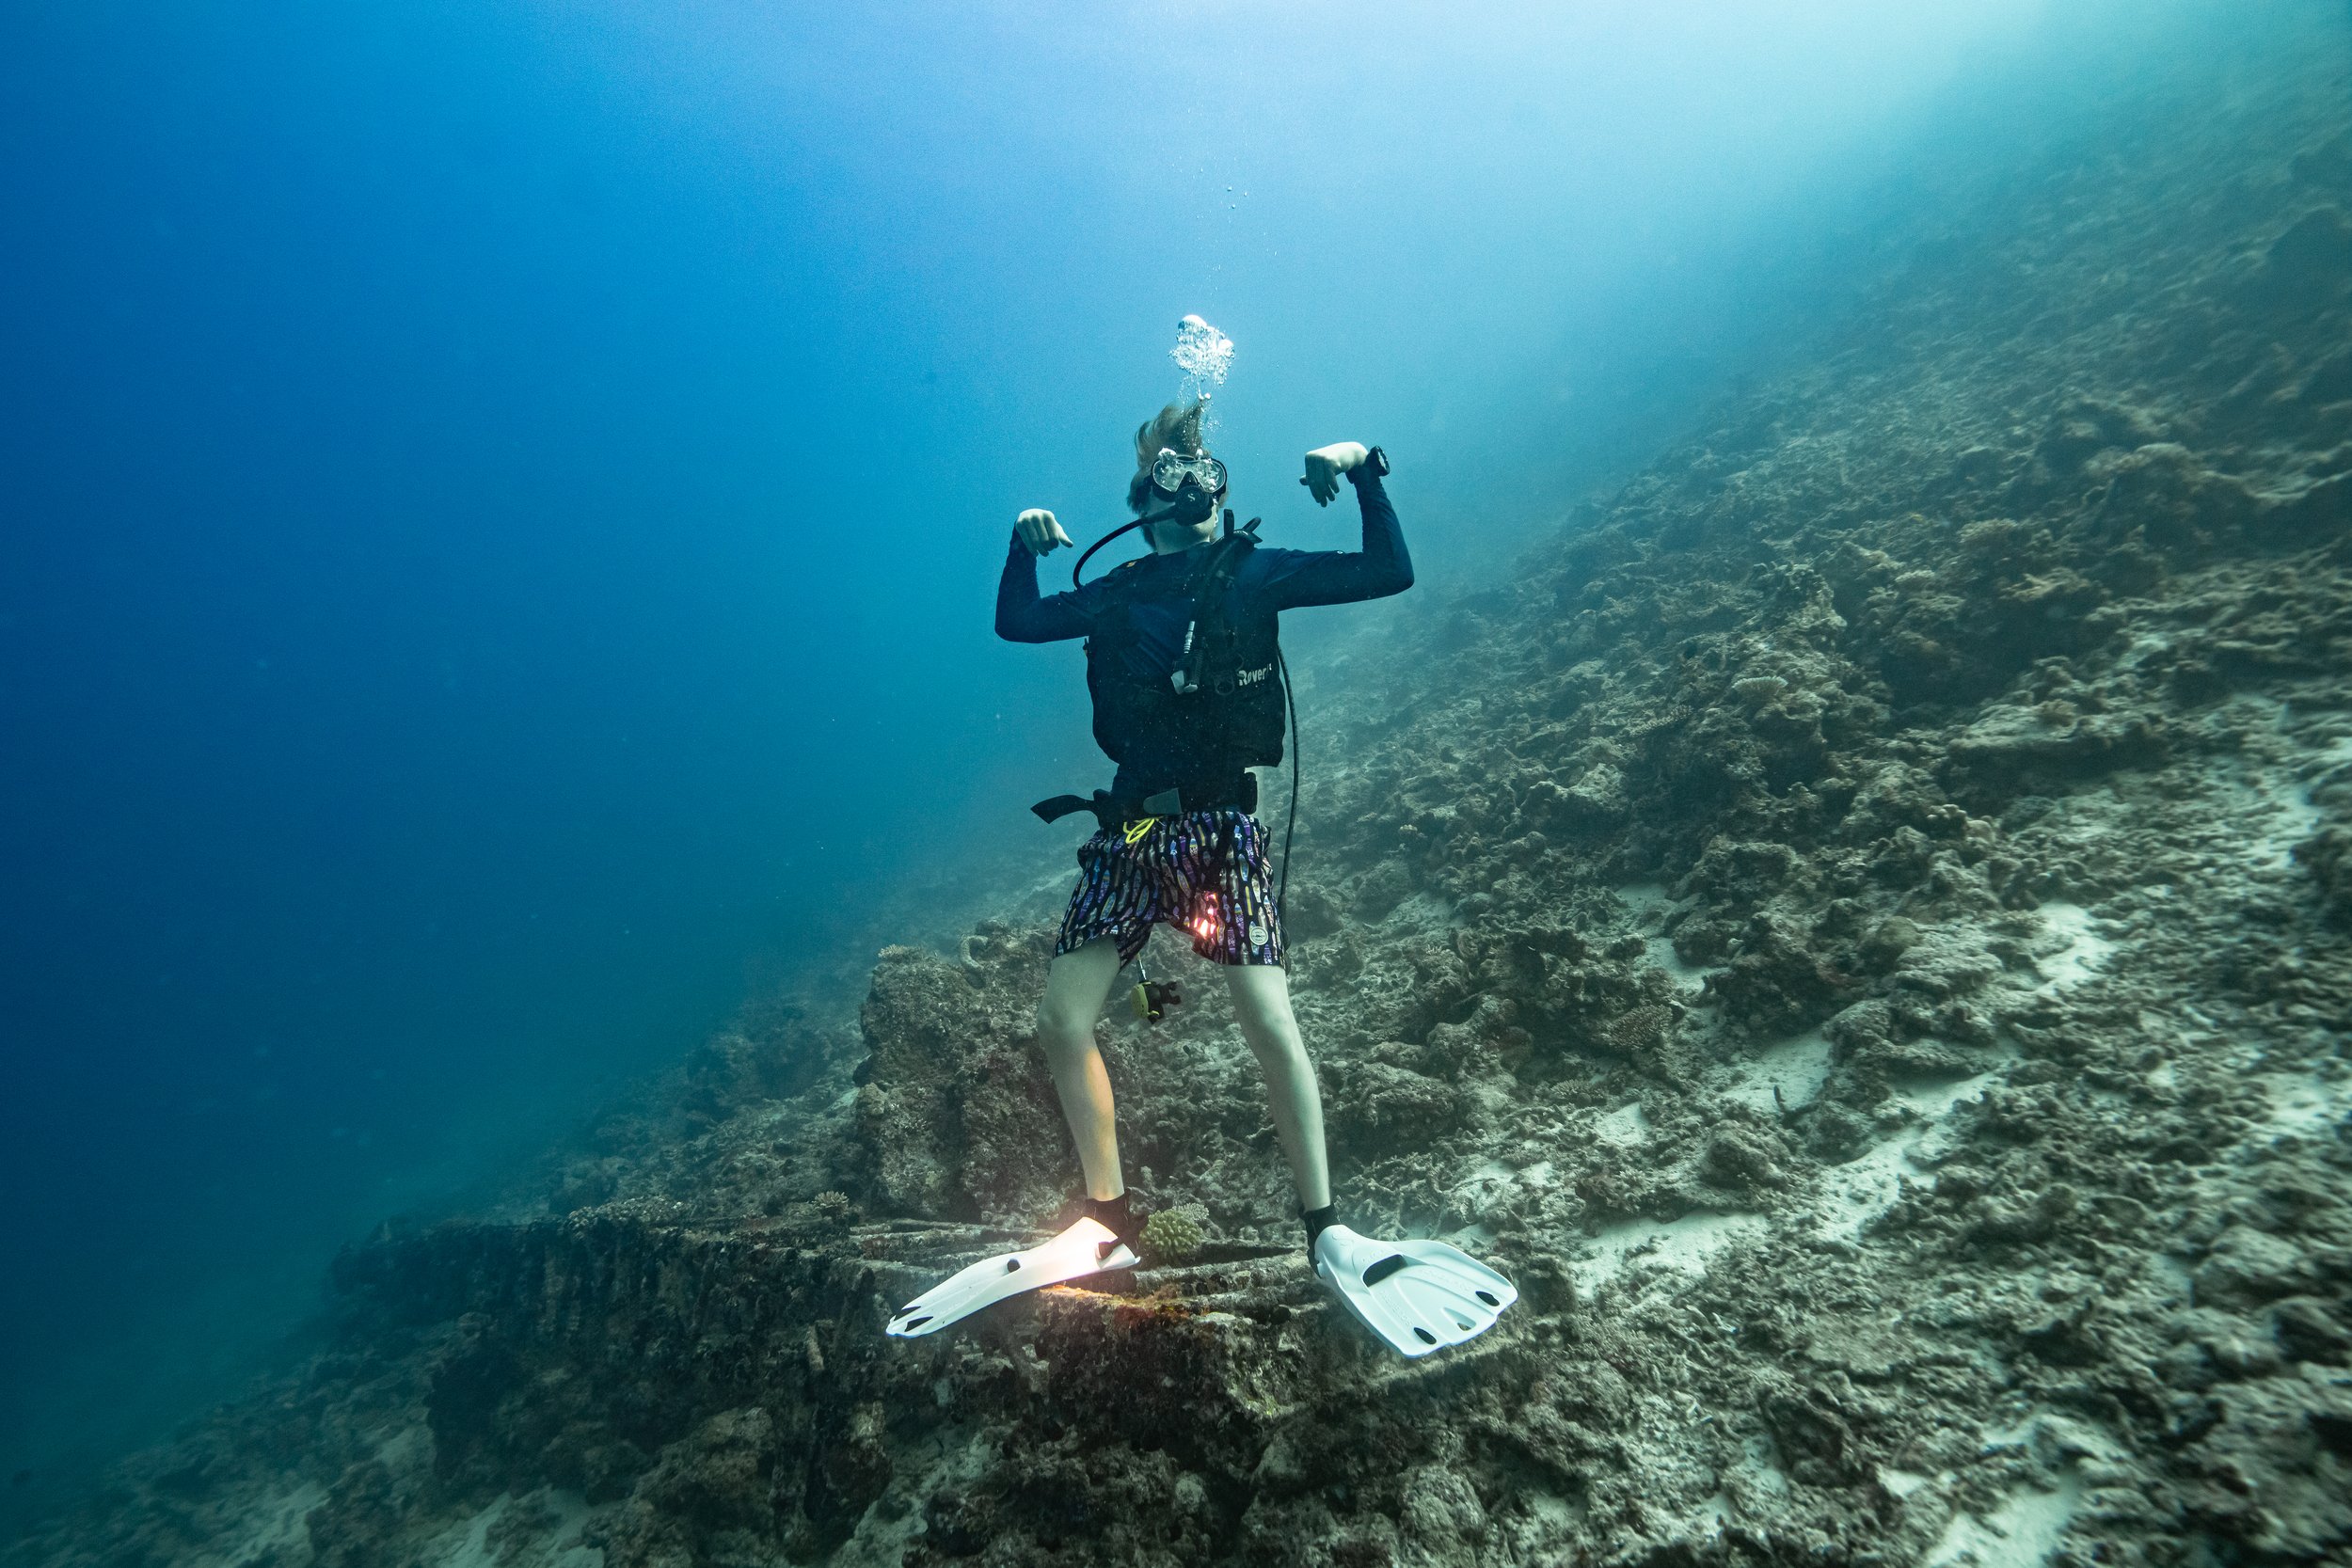   Maldives, 2022  - Goofing around while scuba diving at a ship wreck site. 